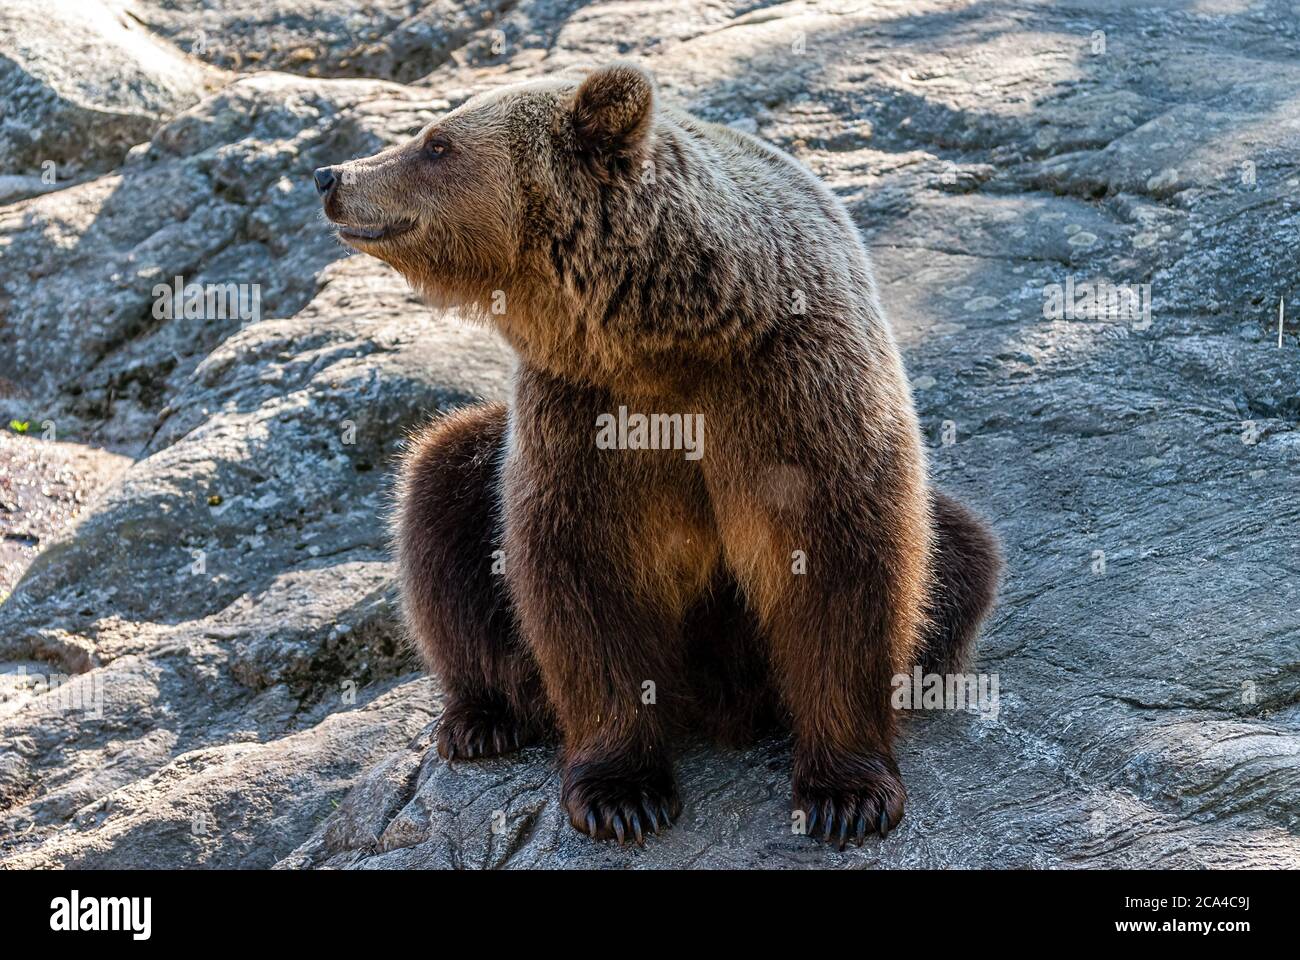 The brown bear (Ursus arctos) is a bear species that is found across much of northern Eurasia and North America. Stock Photo